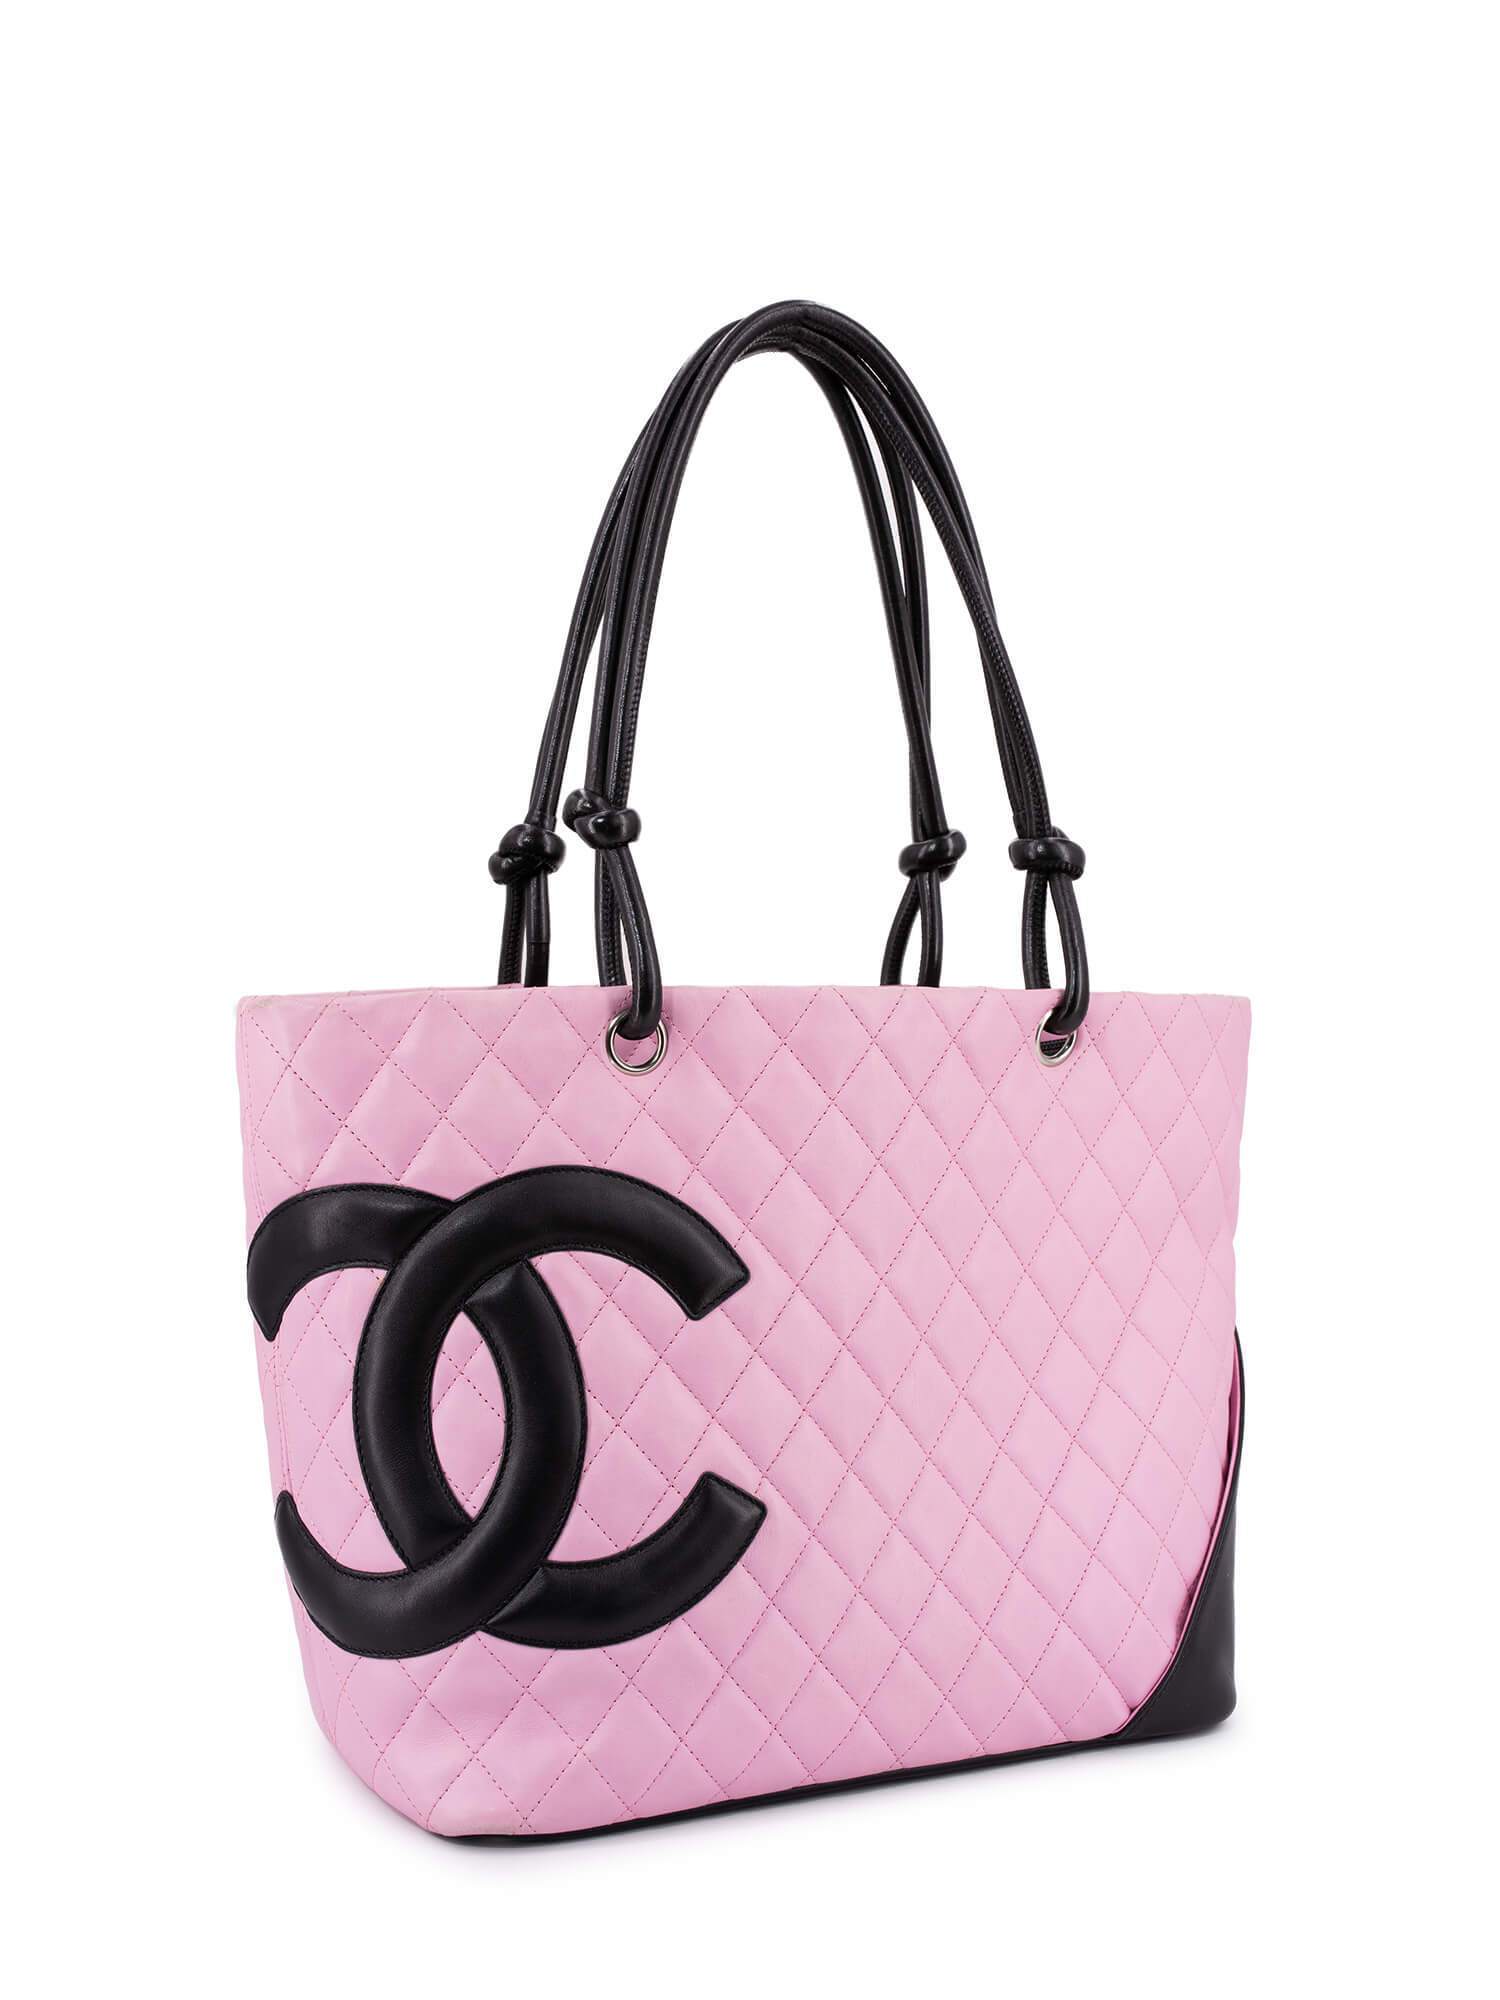 CHANEL Quilted Leather Cambon Bag Pink-designer resale